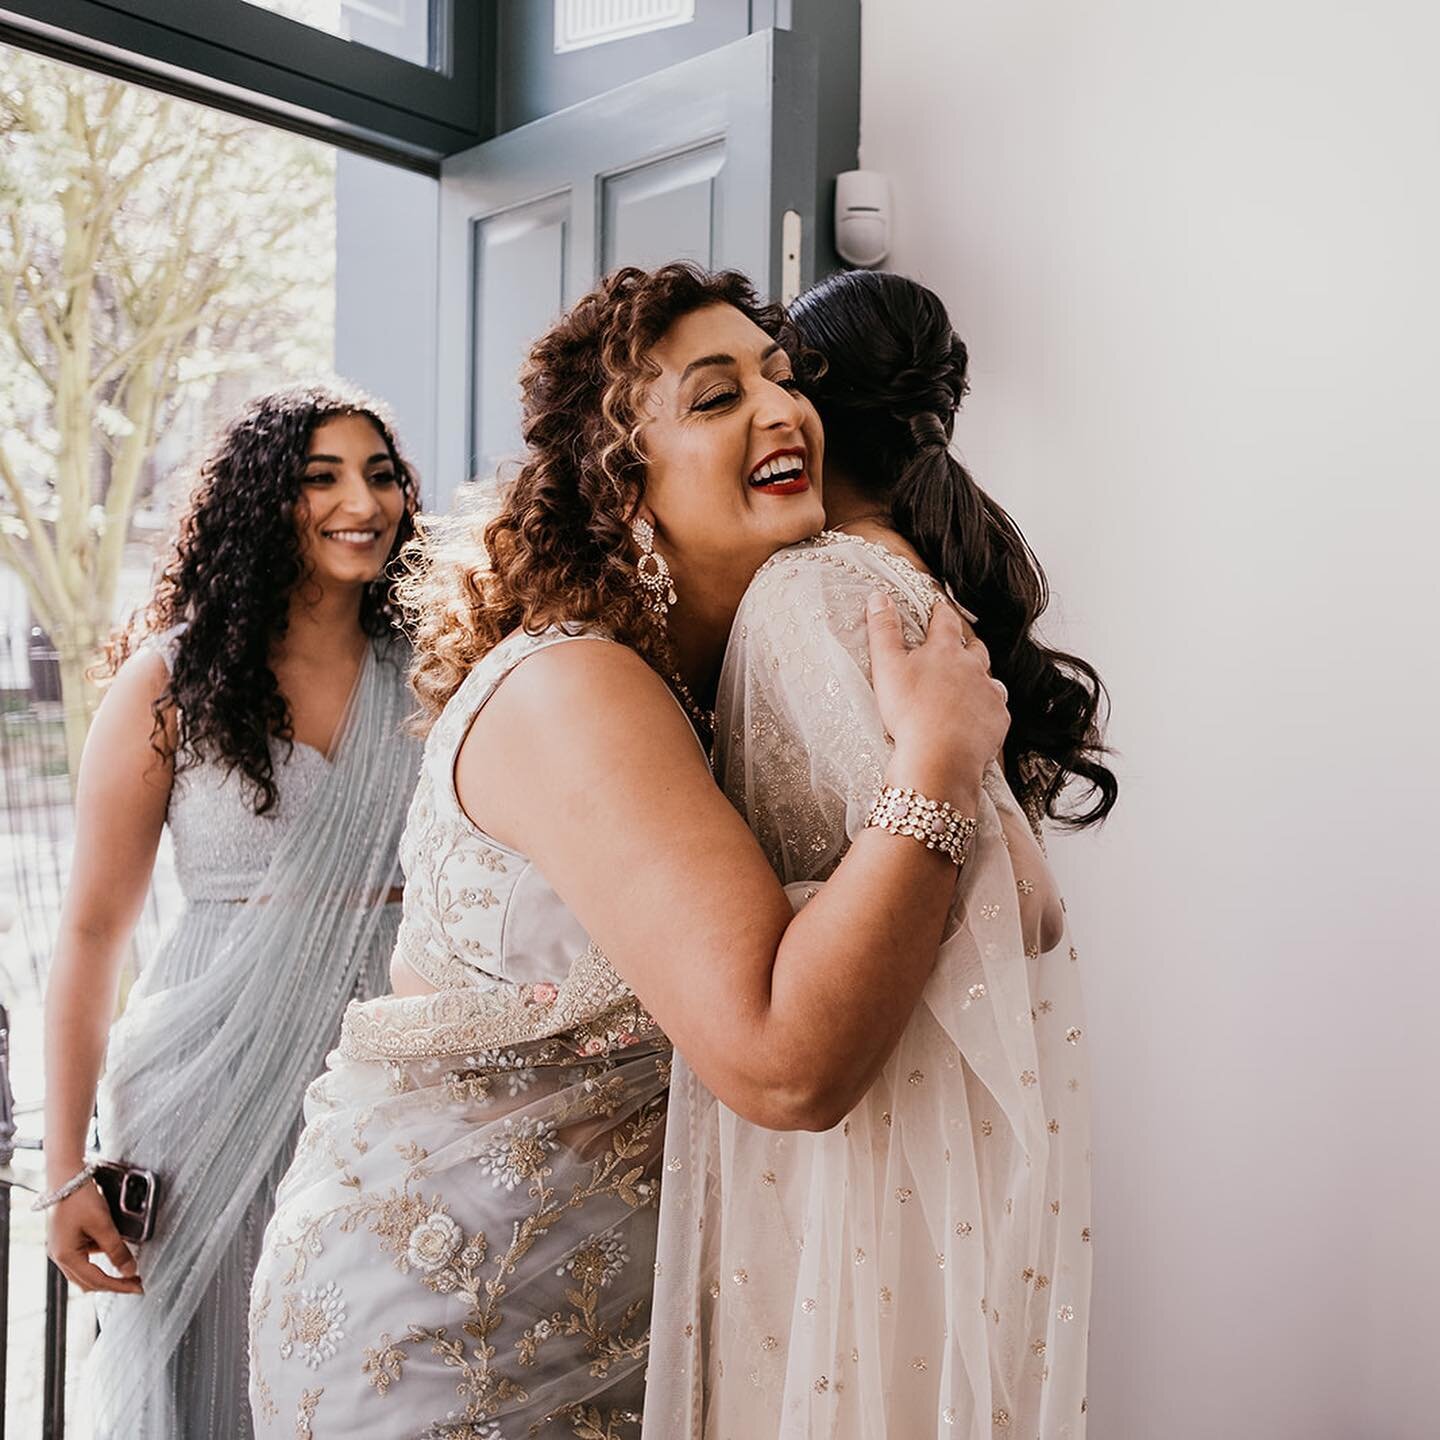 First looks&hellip; whether it&rsquo;s with parents, bridesmaids or family members. They&rsquo;re a must have shot and always brimming with emotion&hellip; and sometimes humour!

#islingtontownhallwedding #islingtontownhall #islingtonassemblyhall #is